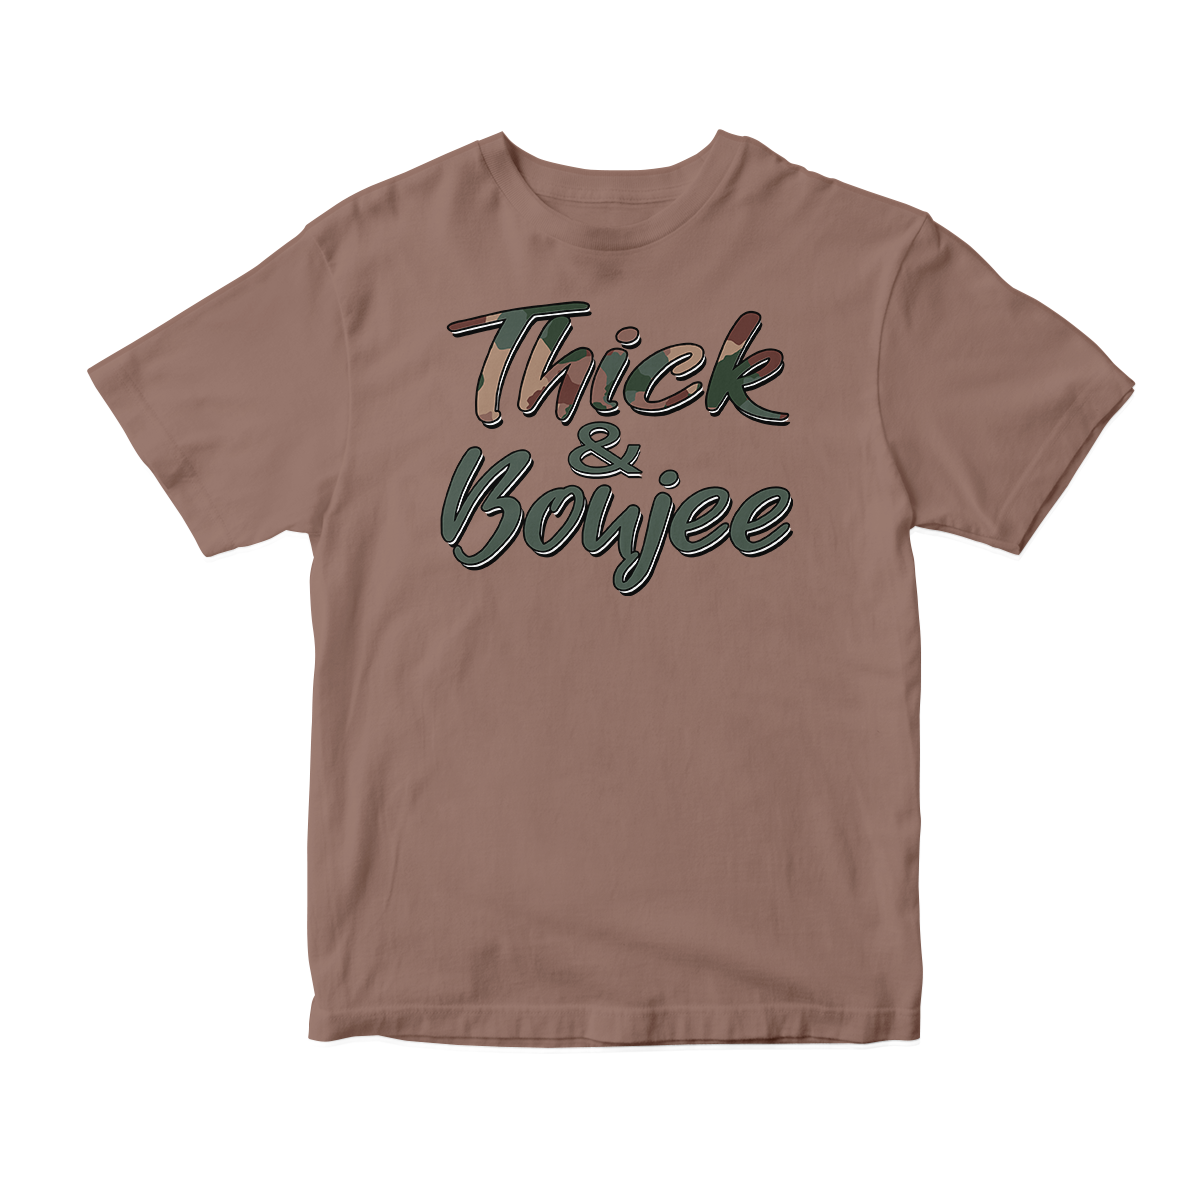 'Thick & Boujee' in Woodland CW Short Sleeve Tee